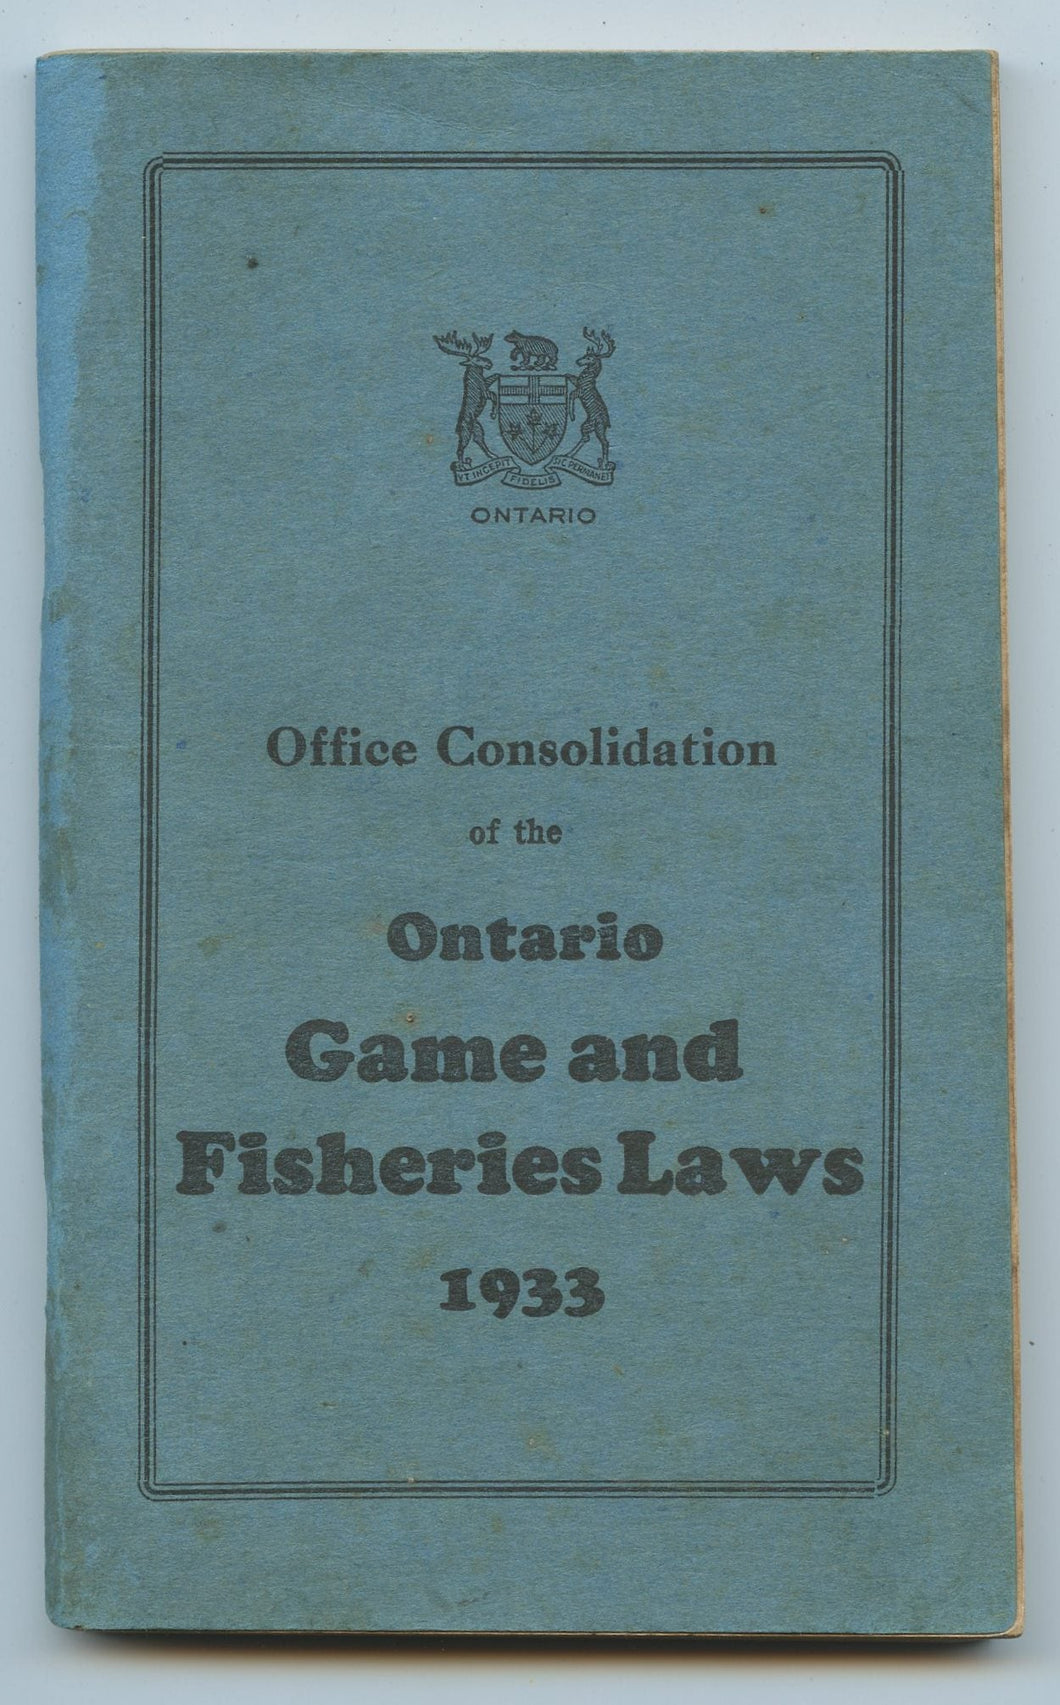 Office Consolidation of the Ontario Game and Fisheries Laws 1933